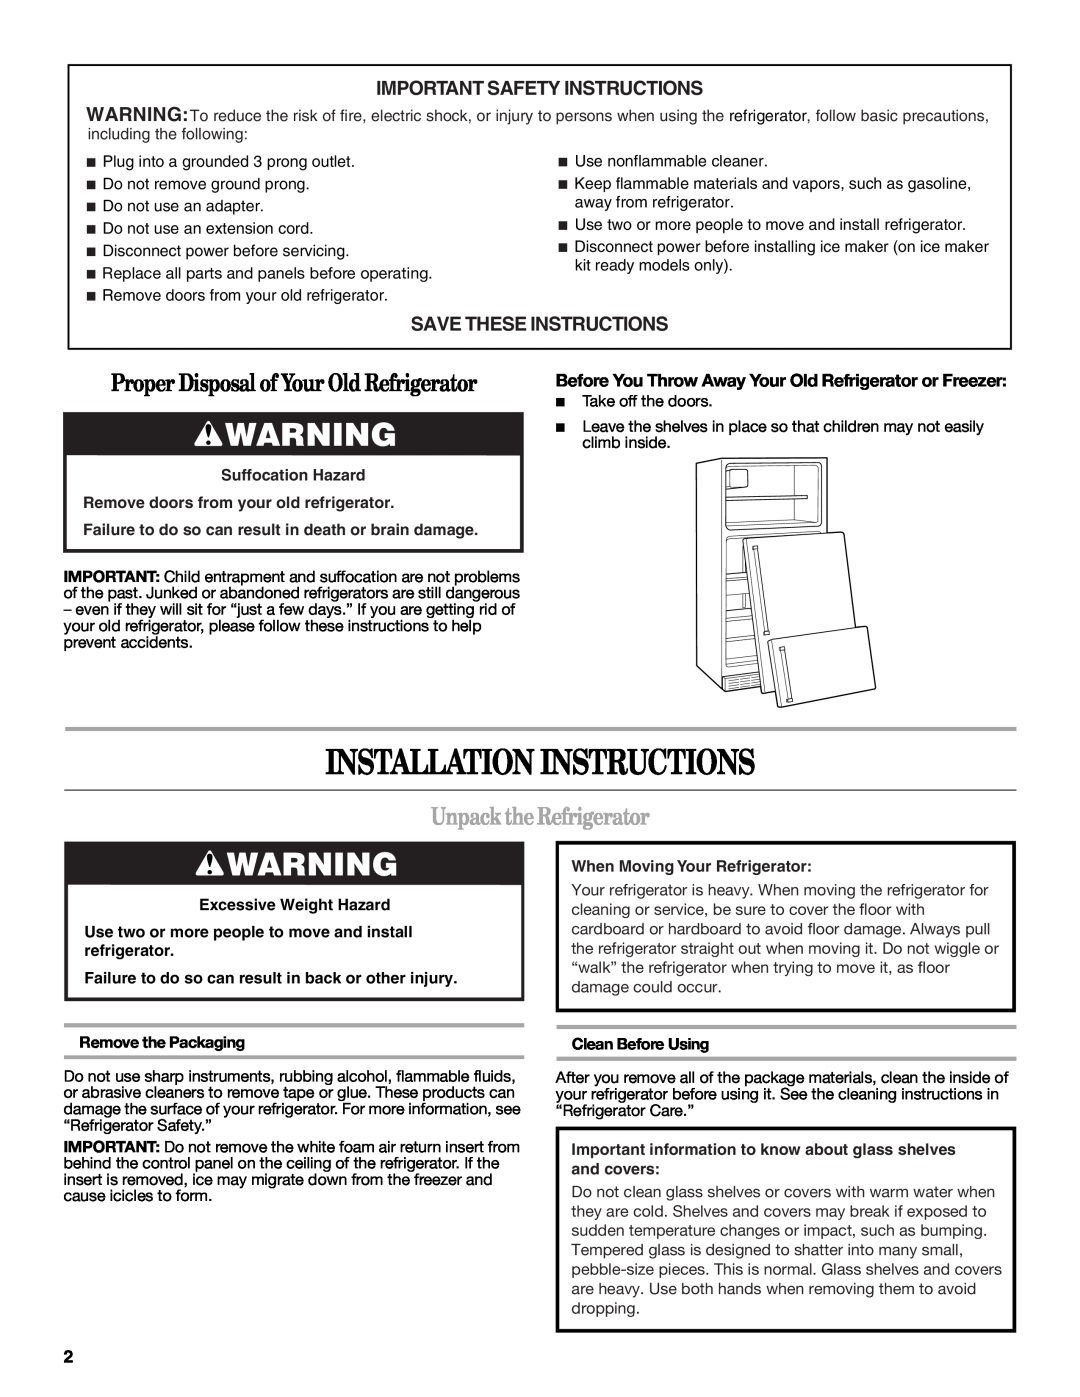 Whirlpool W10249204A Installation Instructions, Unpack the Refrigerator, Important Safety Instructions, Suffocation Hazard 